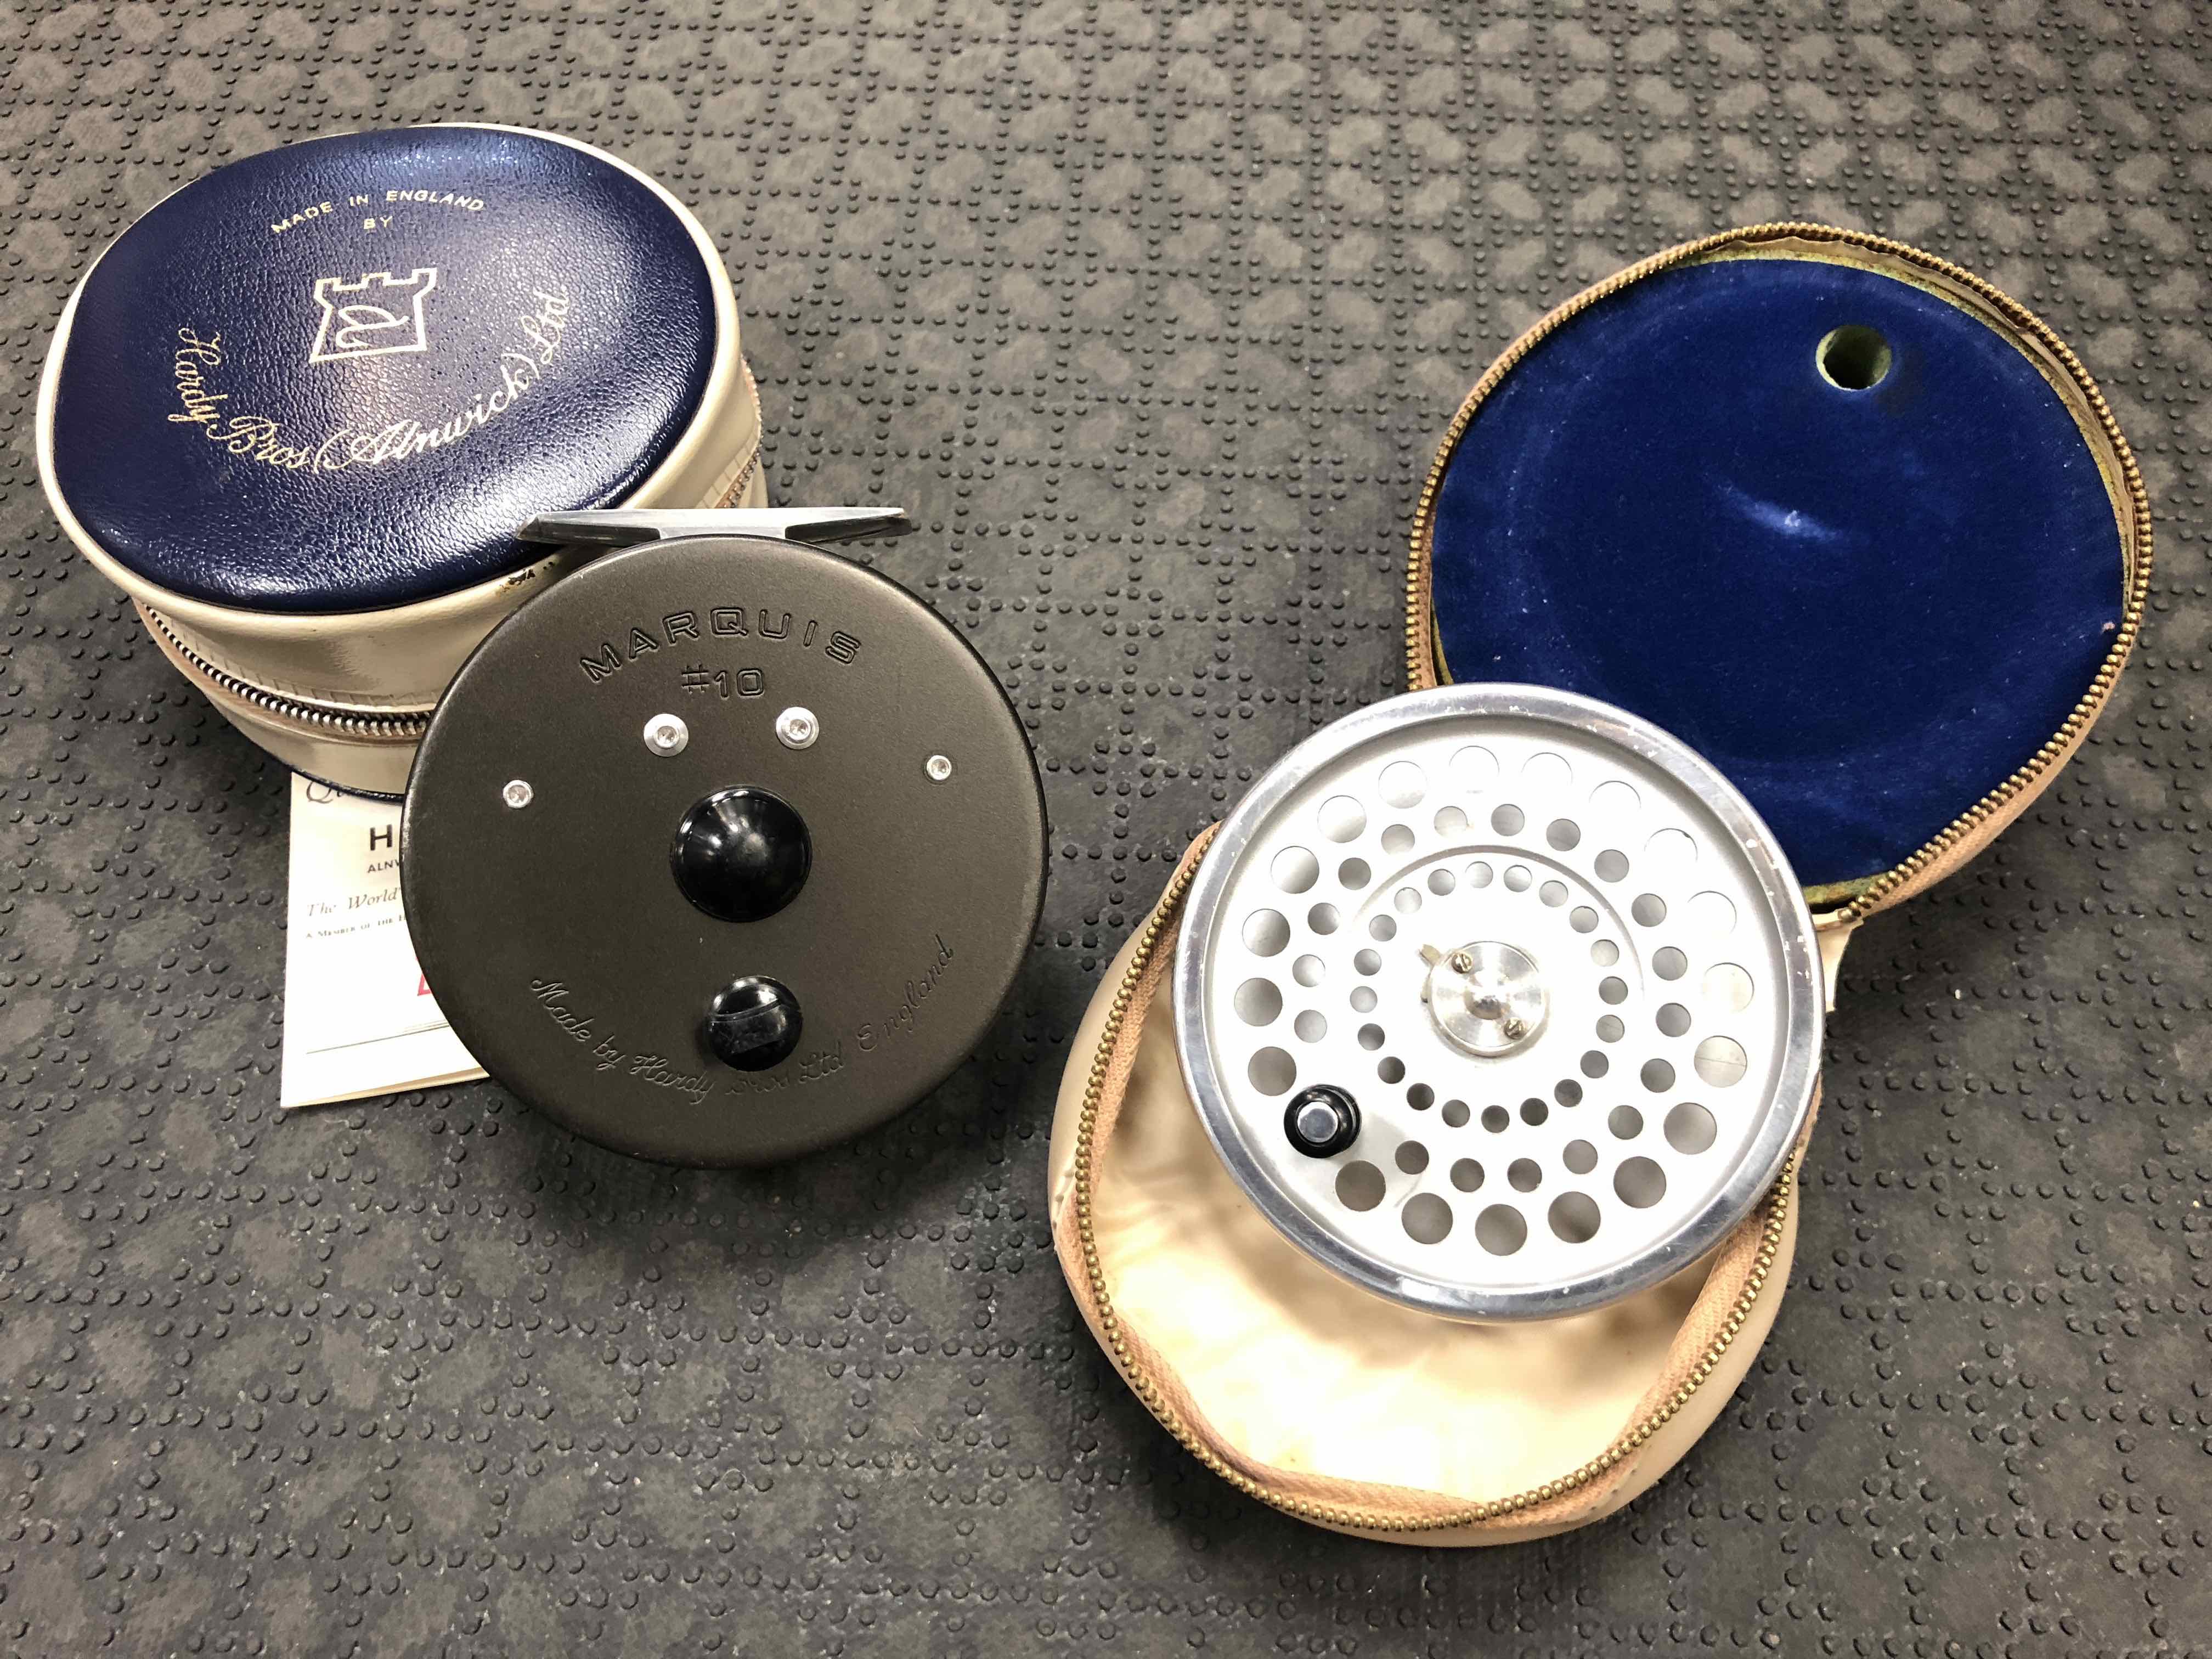 Hardy Fly Reel - Made in England - Marquis #10 c/w Spare Spool & Two Vinyl Zippered Cases - GREAT SHAPE! - $245